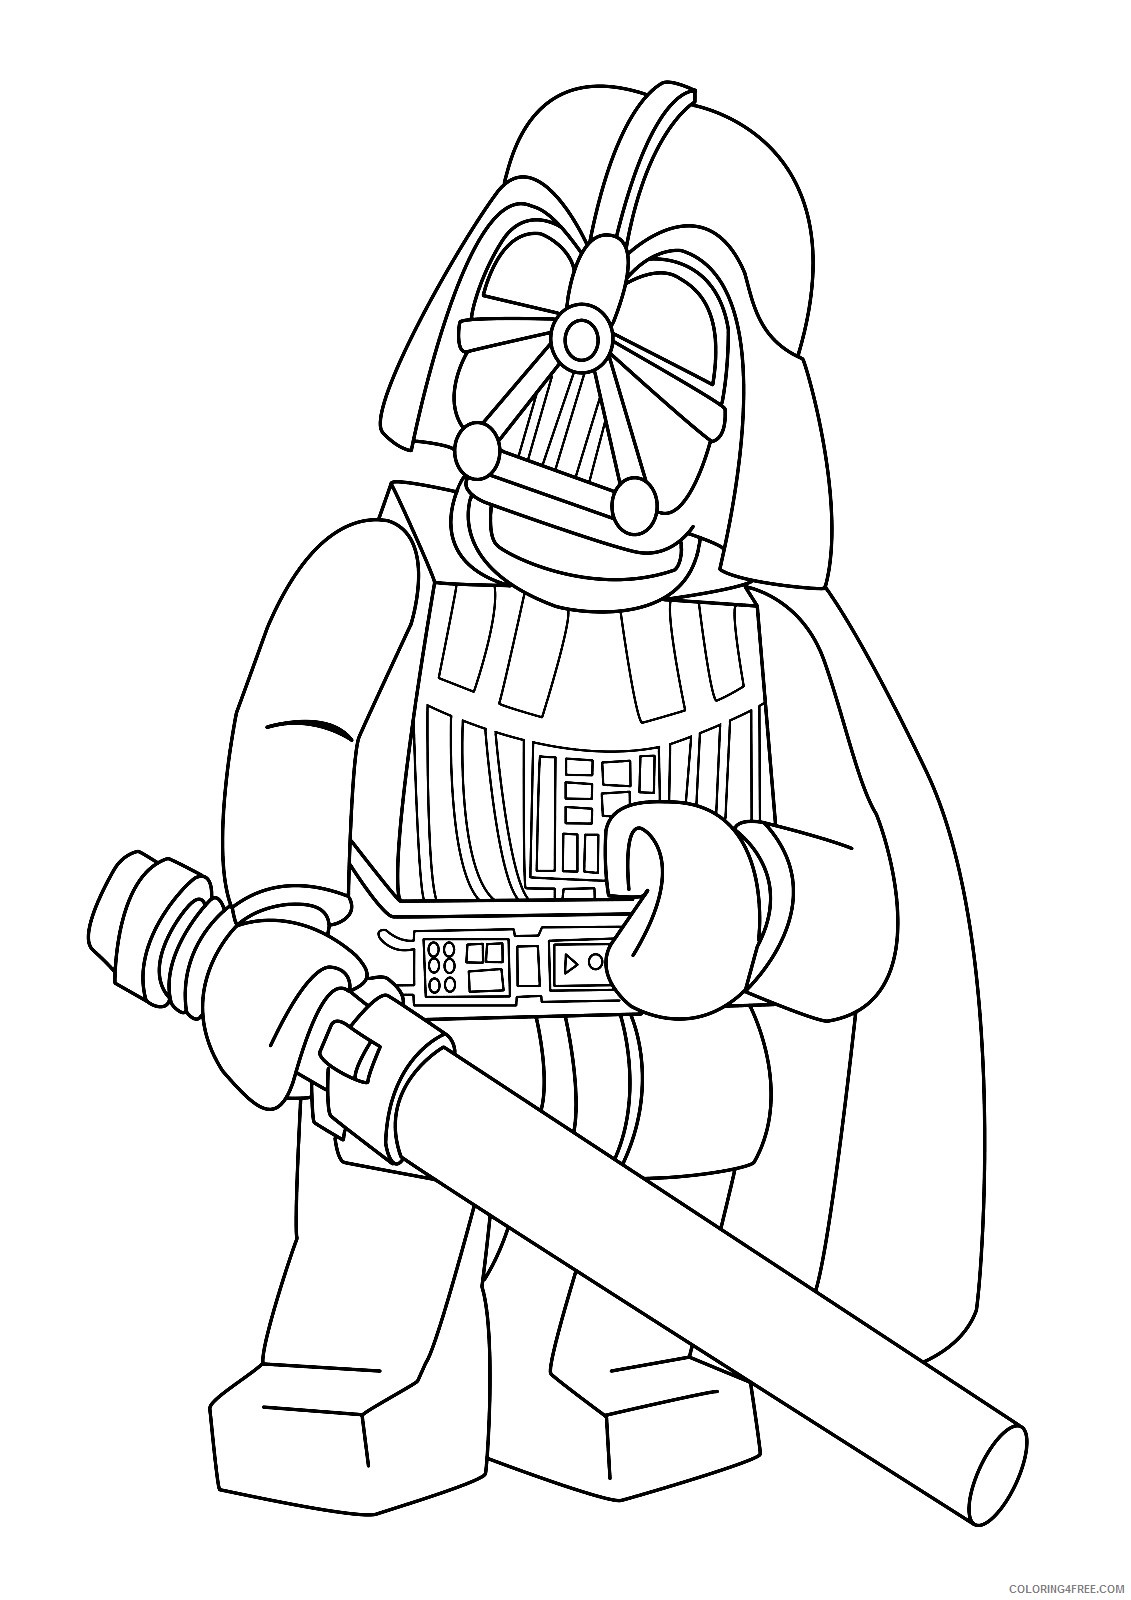 LEGO Star Wars Coloring Pages Cartoons Lego Star Wars Printable 2020 3773 Coloring4free